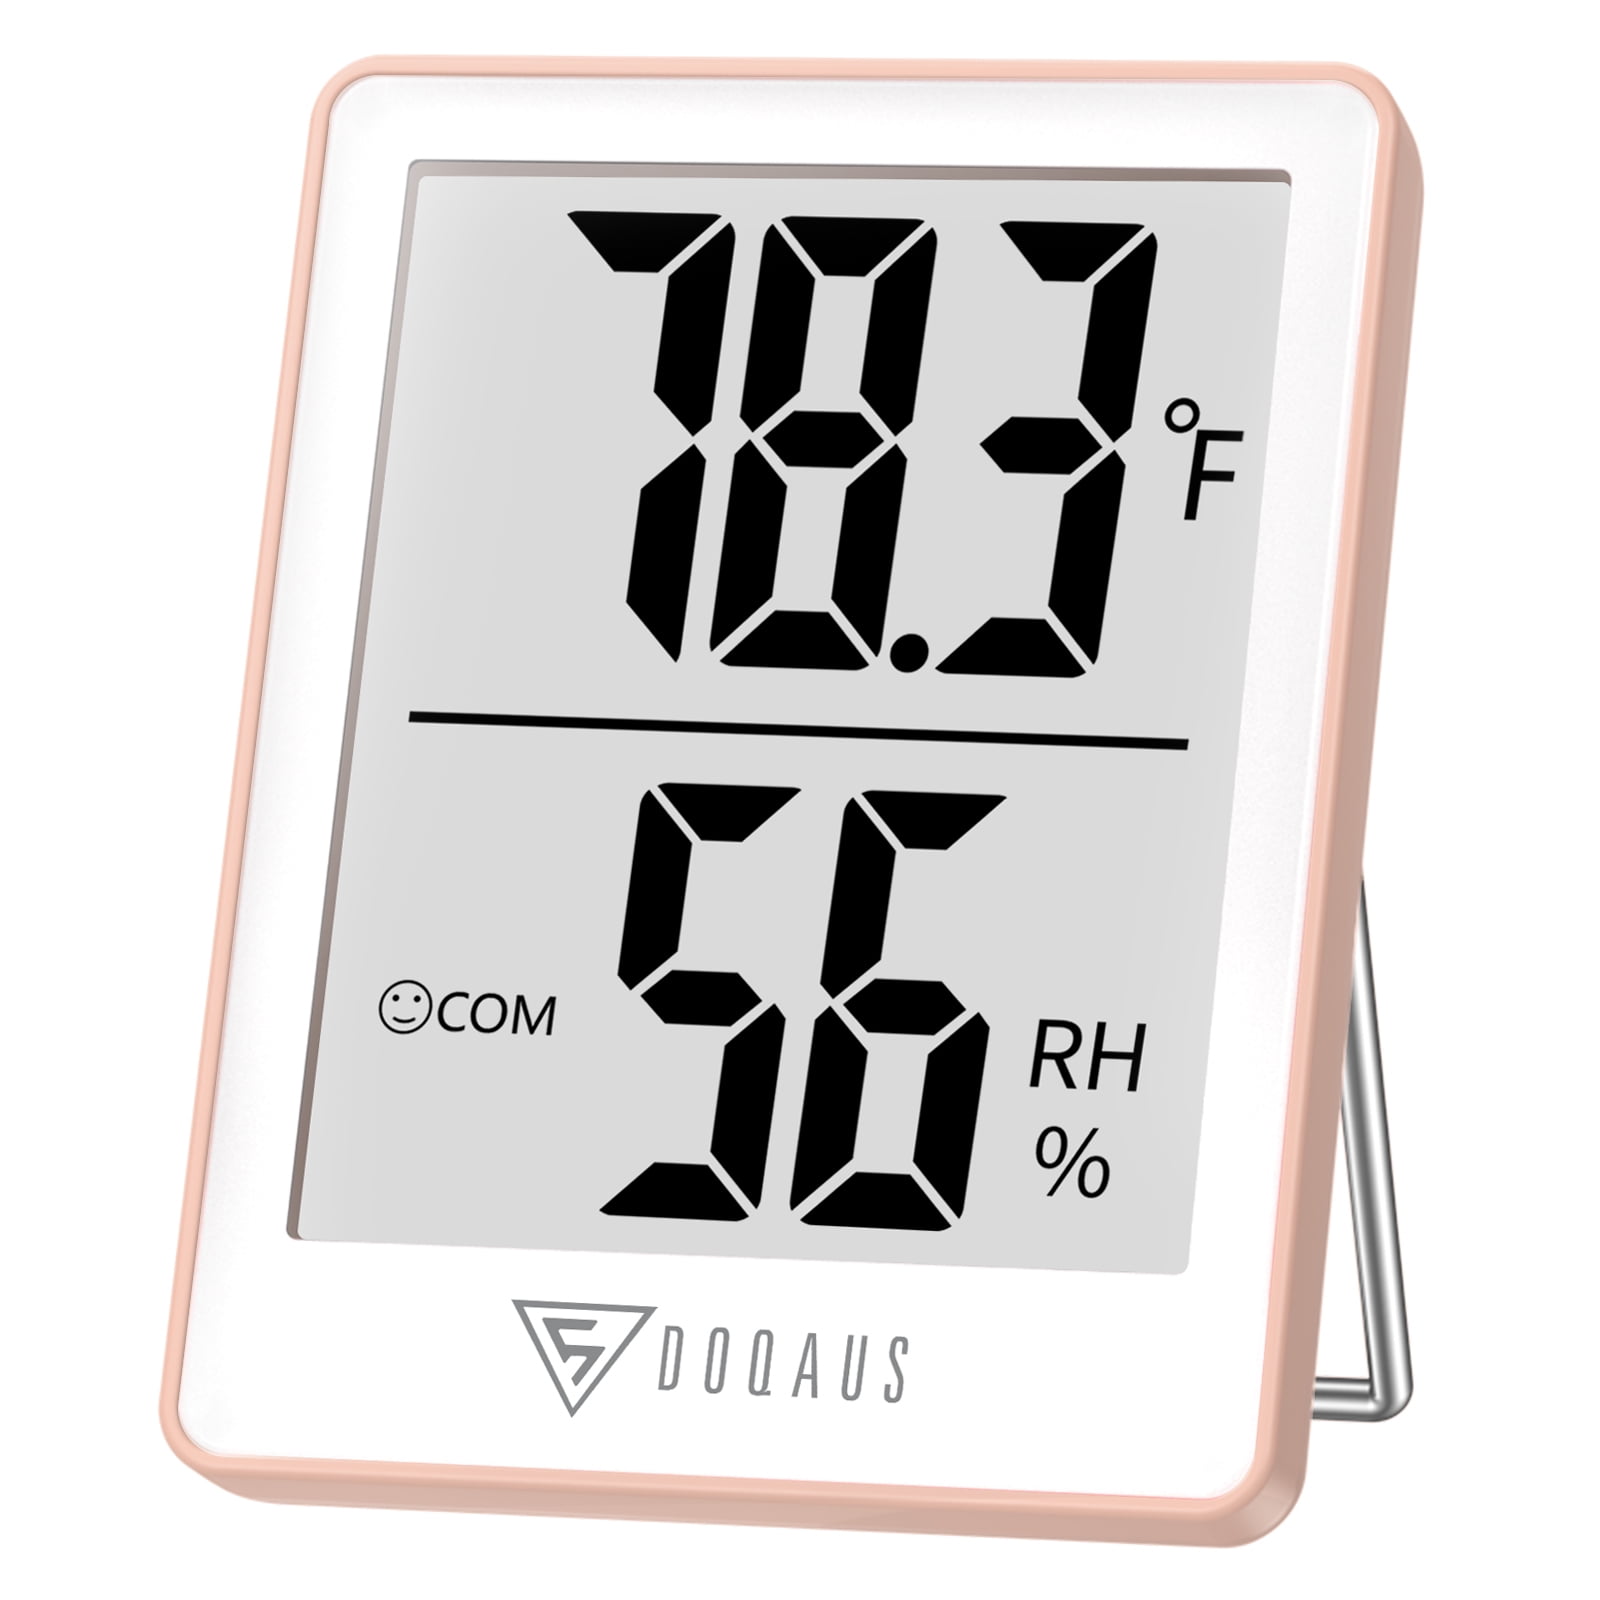 DOQAUS iSH09-M608375mn Digital Hygrometer Indoor Thermometer Humidity Meter  Room Thermometer with 5s Fast Refresh Accurate Temperature Humidity Monito